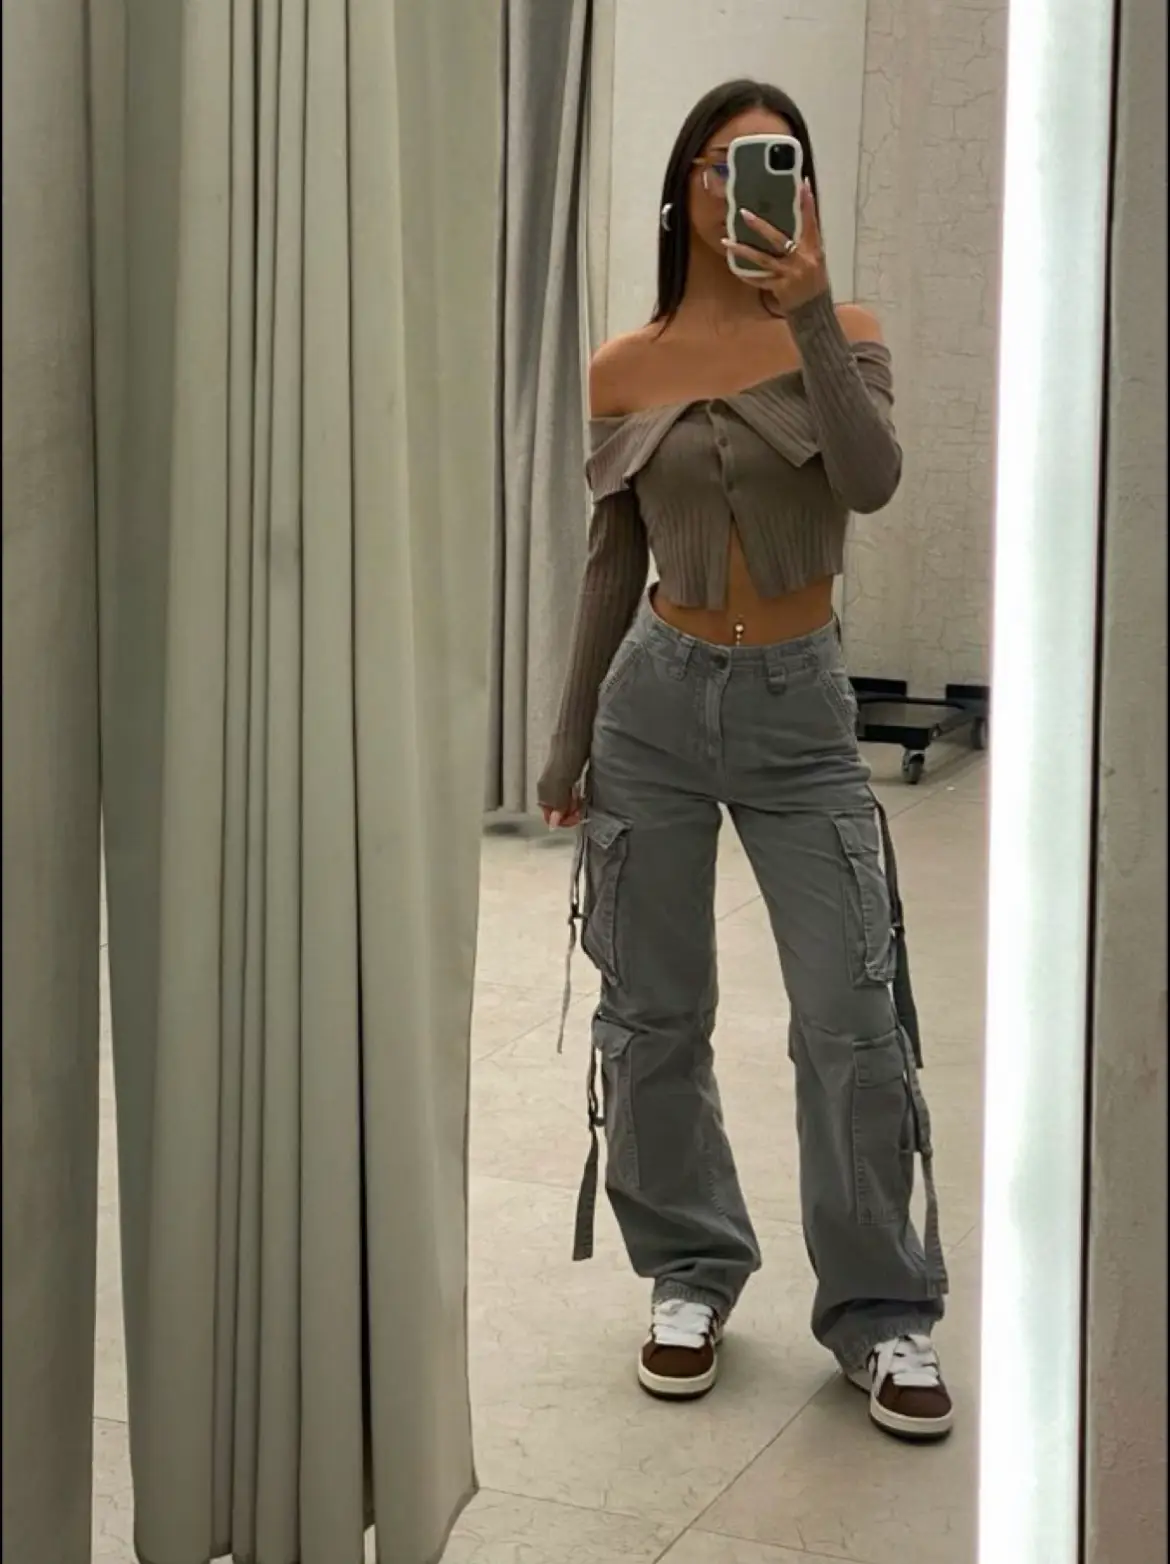  A woman wearing a white shirt and jeans is taking a selfie in a mirror.